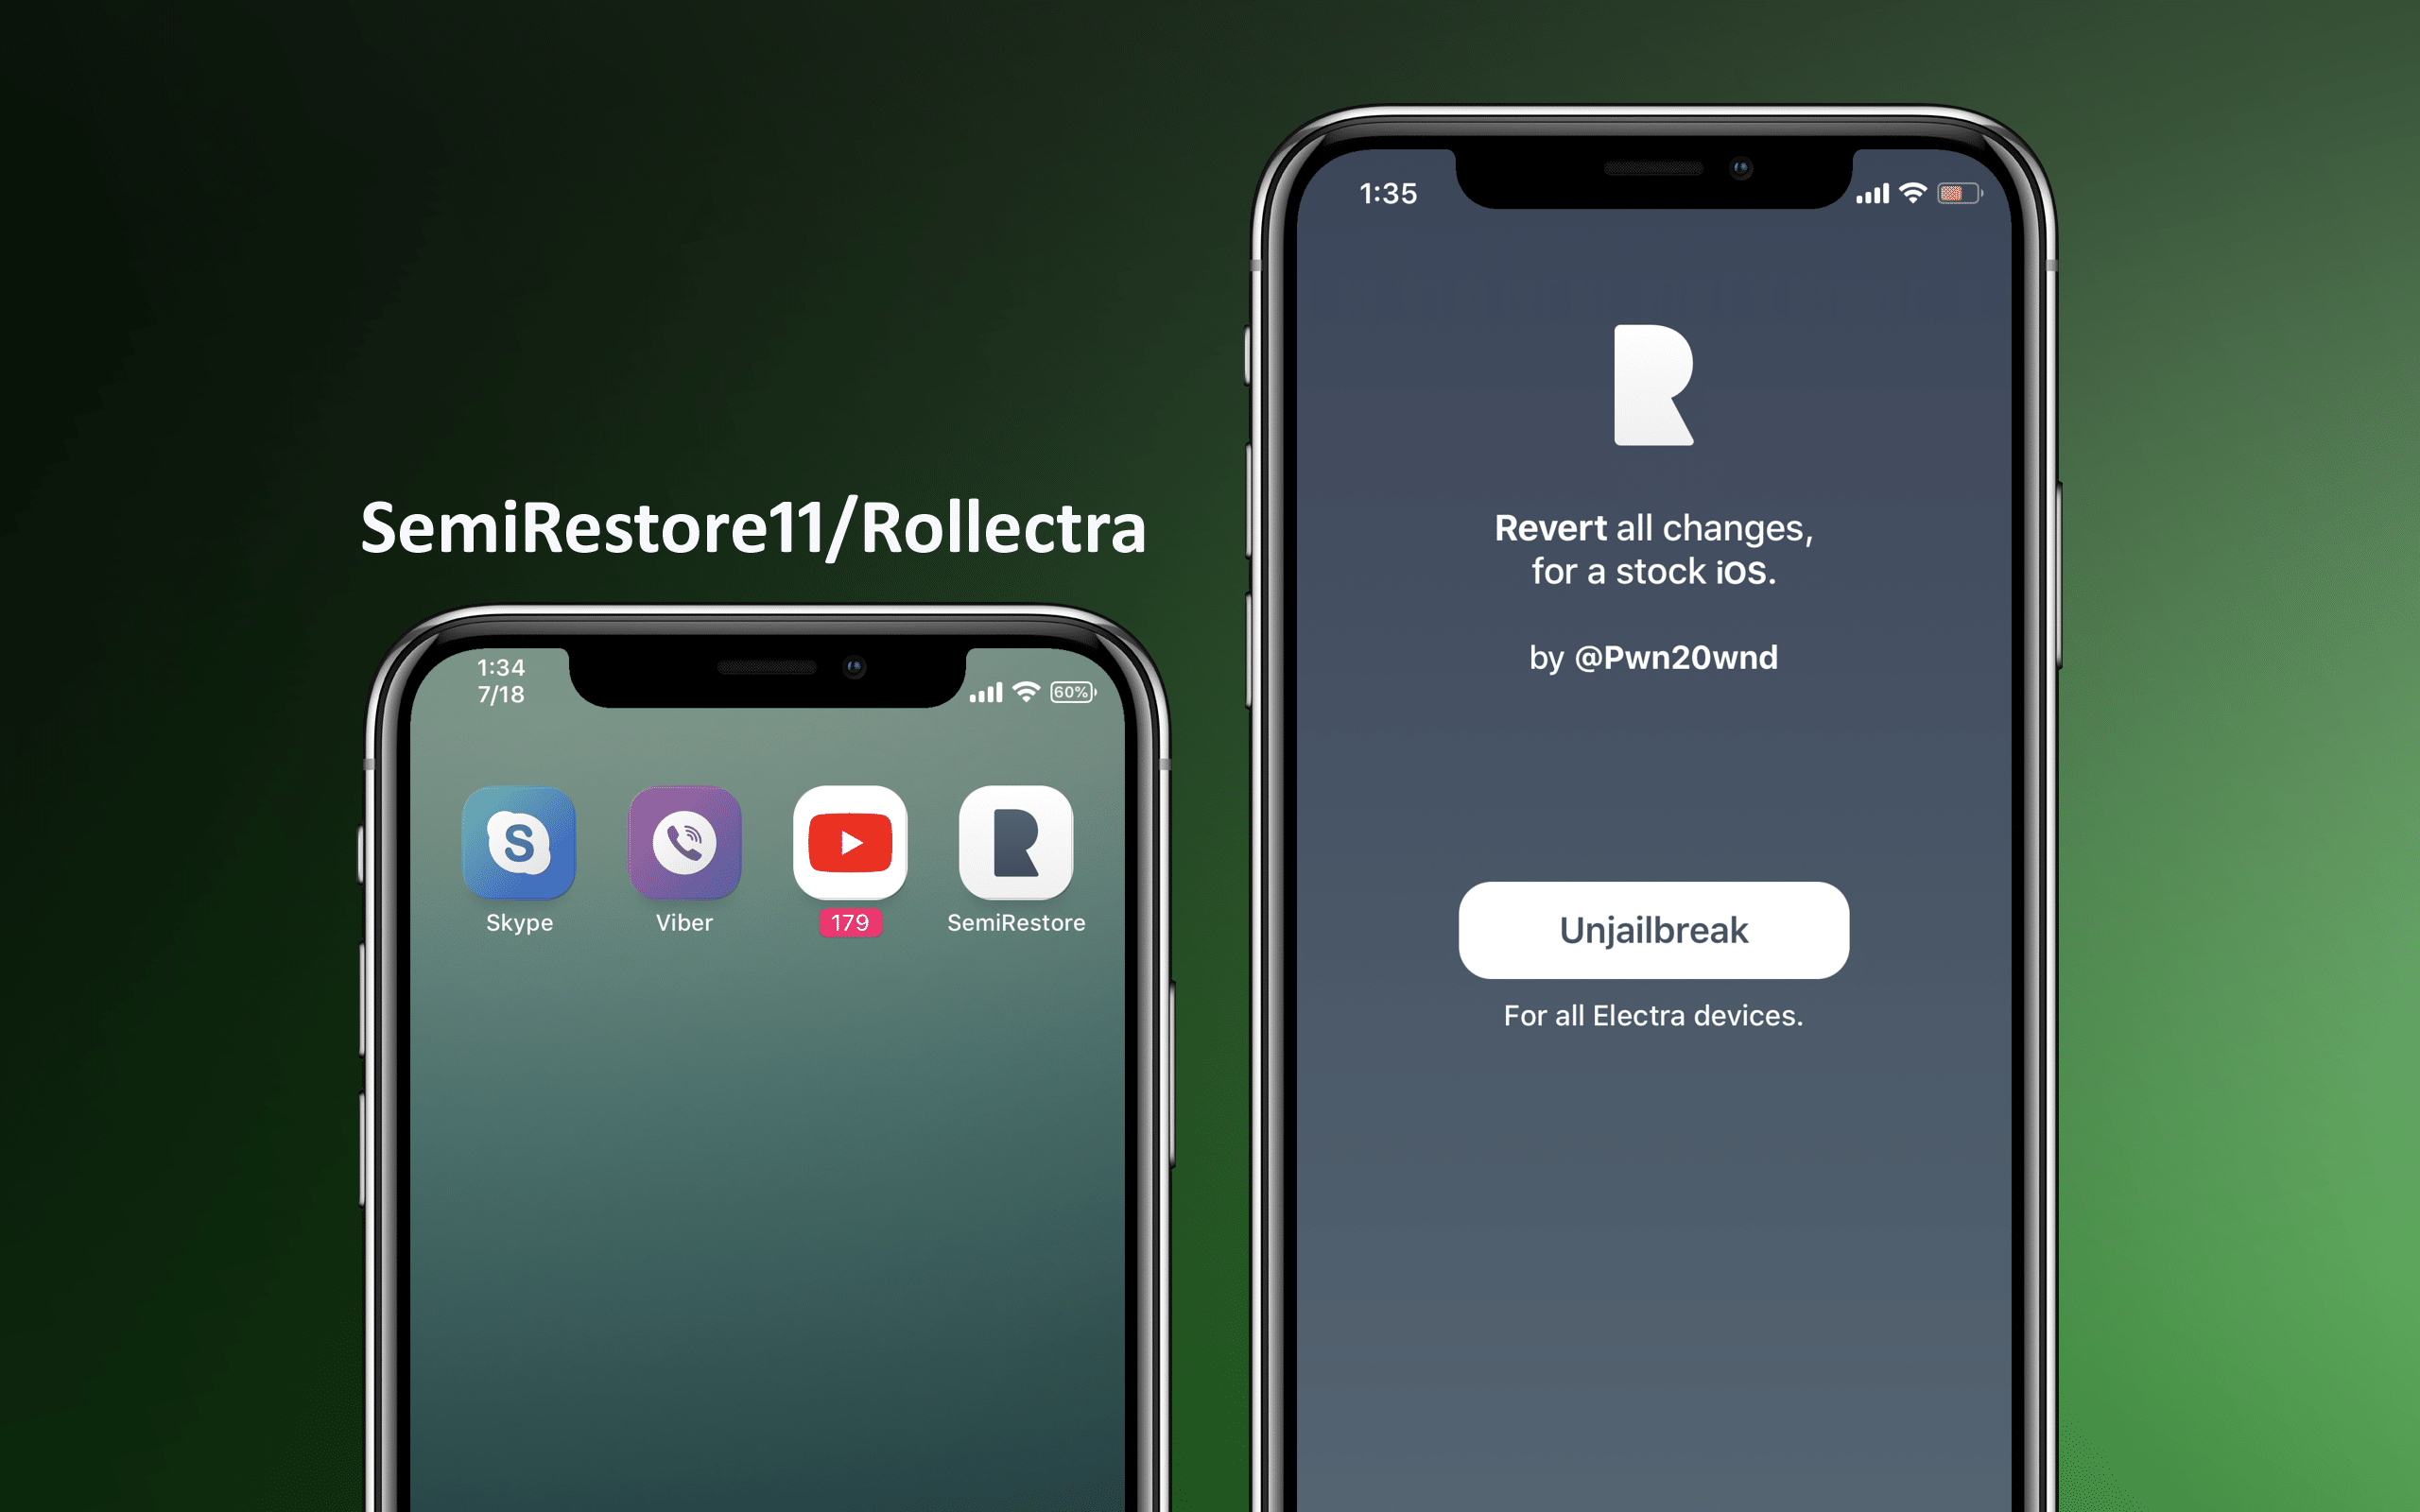 Rollectra/SemiRestore11 Update Brings Support for iOS 11.3-11.4.x, Adds Improvements